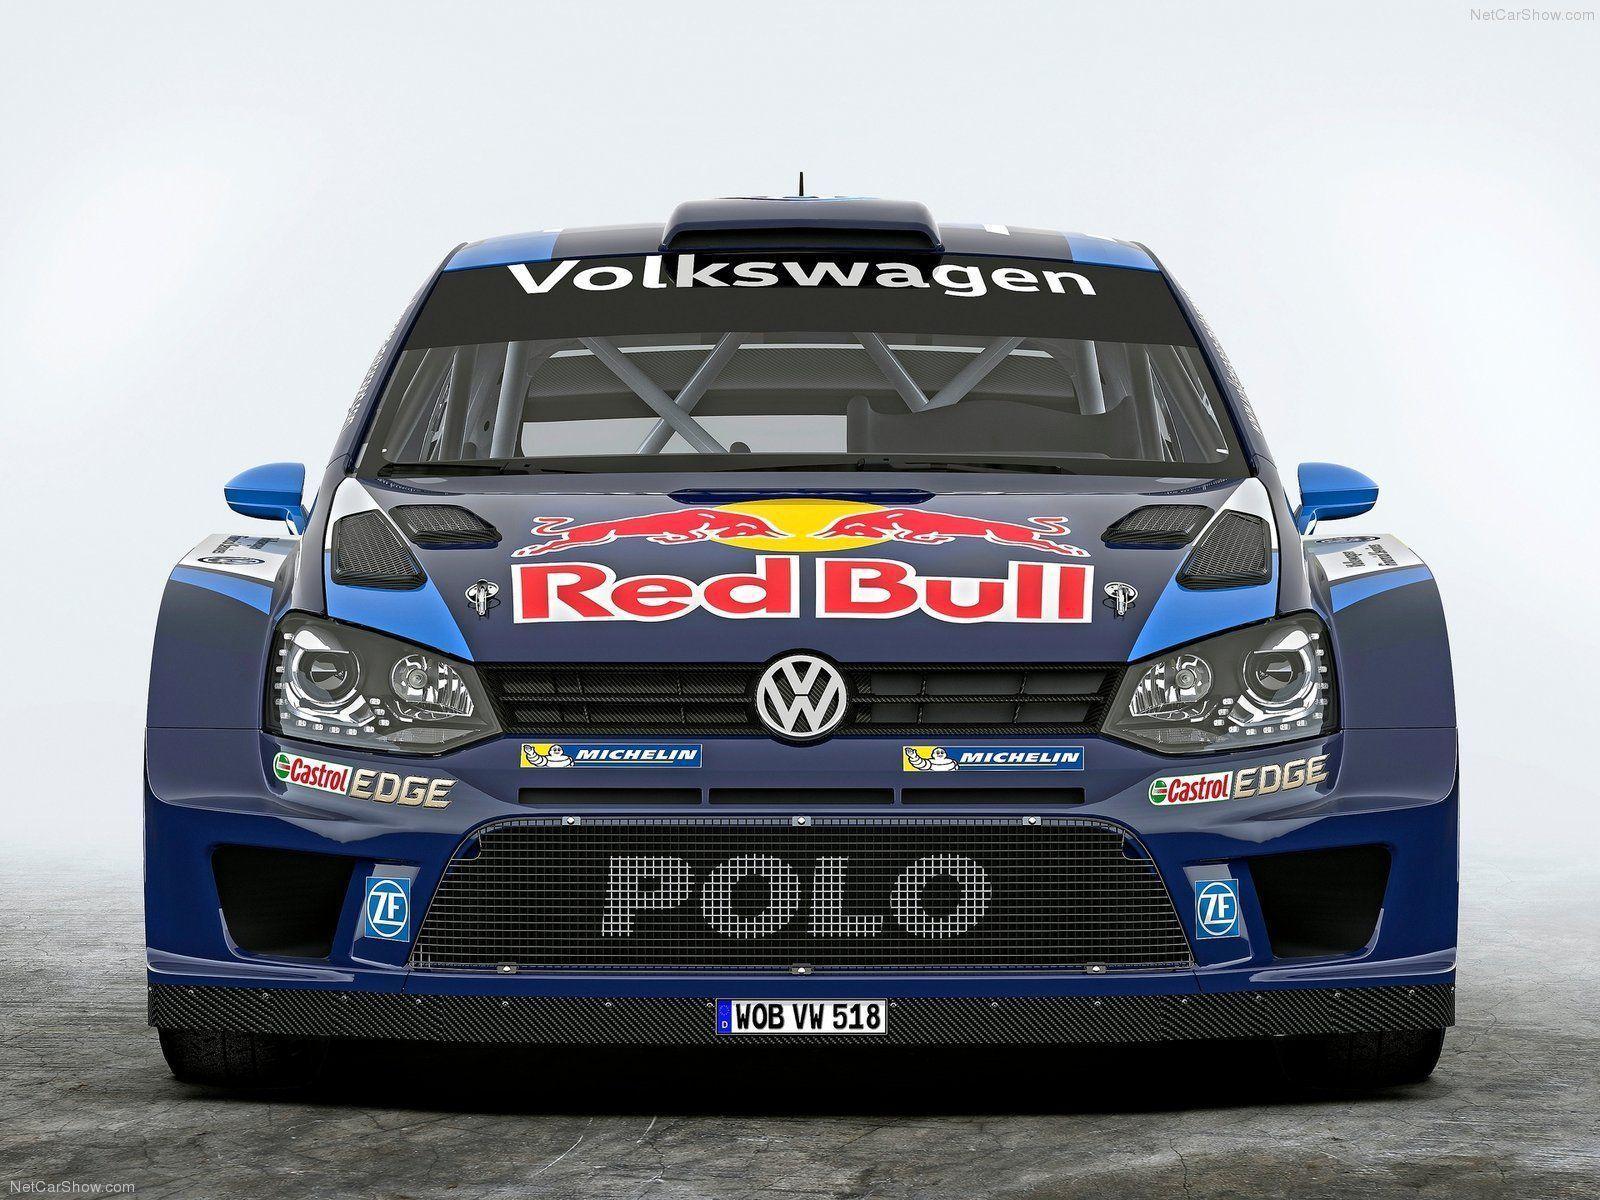 Volkswagen Polo WRC Top Sports Utility Vehicle